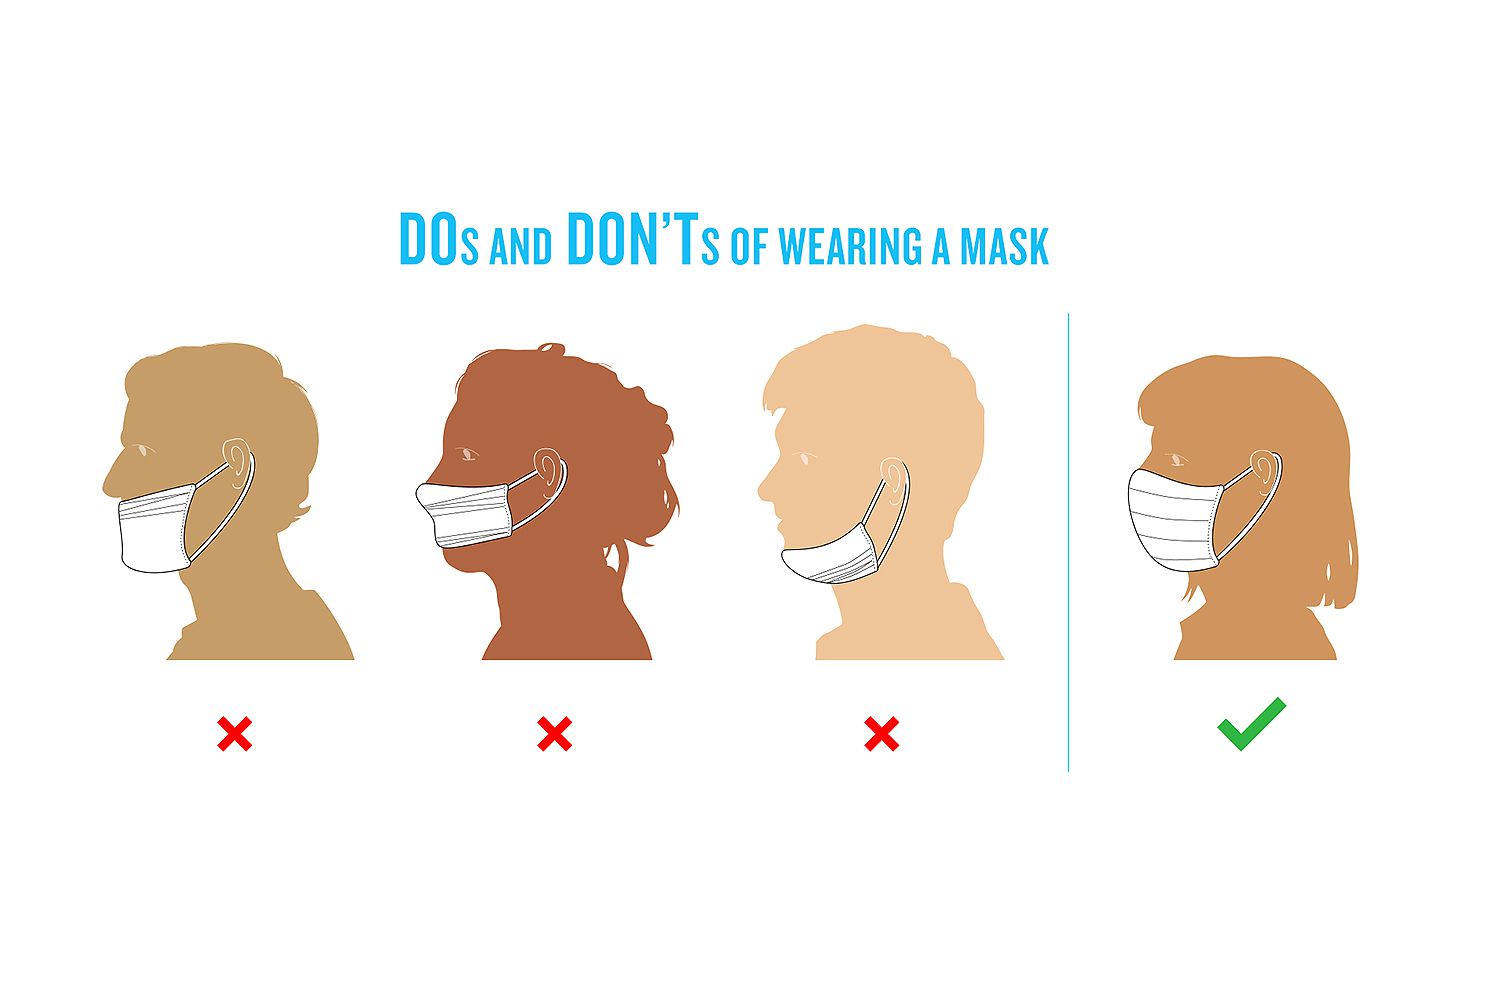 do and don't wearing a mask